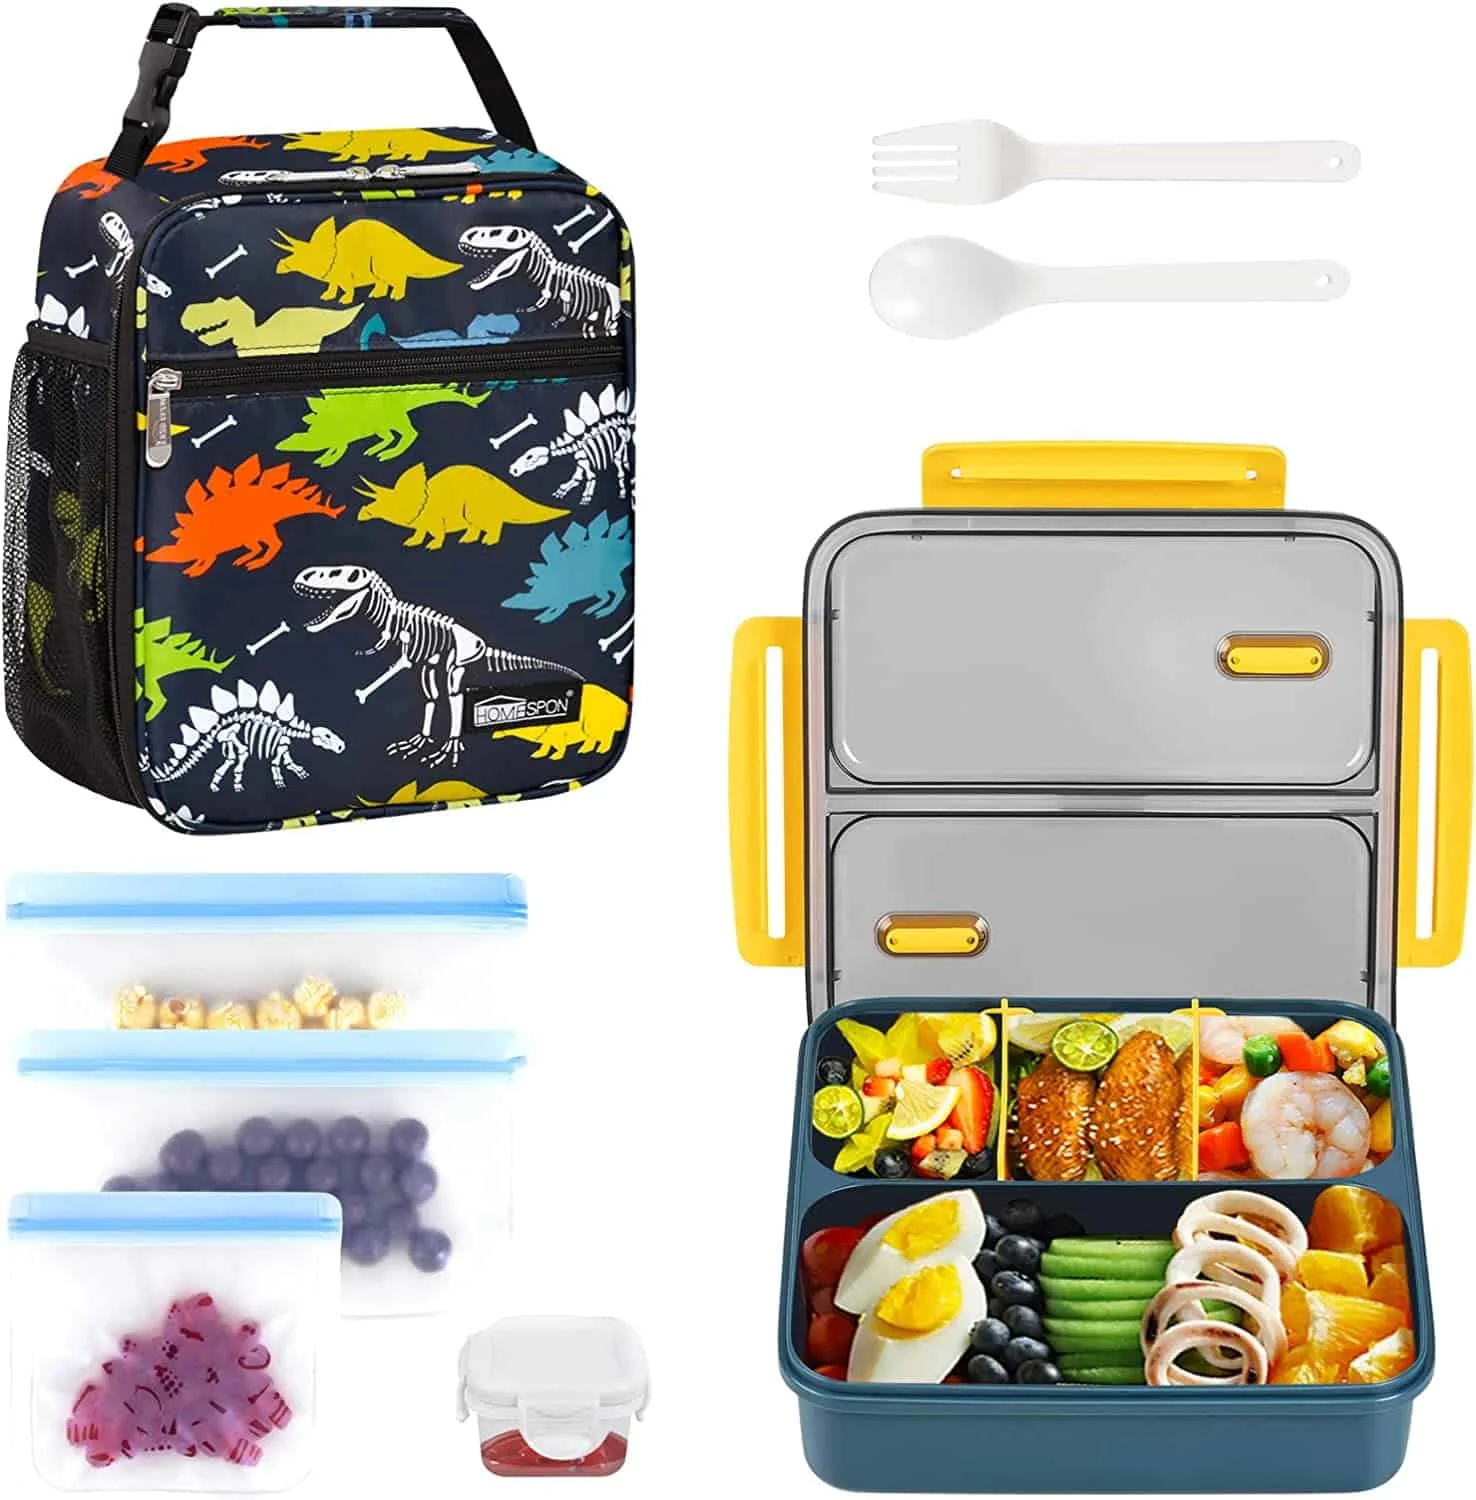 Bentology Lunch Box for Boys - Kids Insulated, Durable Lunchbox Tote Bag  Fits Bento Boxes, Nesting Containers w/ Lids & Bottles, Back to School Lunch  Sleeve Kee